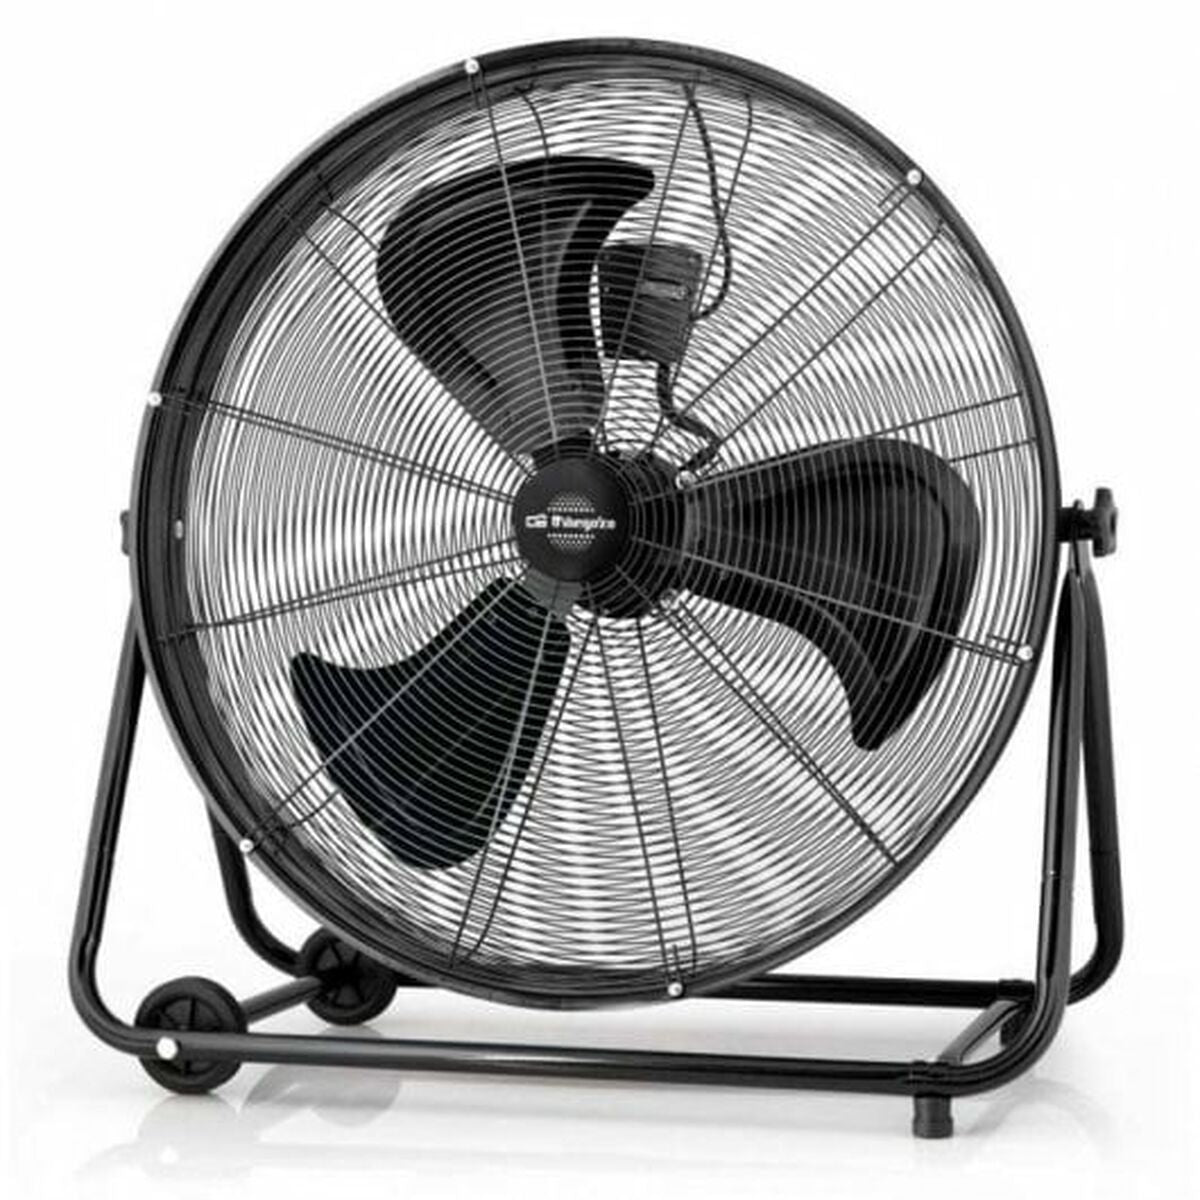 Freestanding Fan Orbegozo PWT 3061 Black 180 W, Orbegozo, Home and cooking, Portable air conditioning, freestanding-fan-orbegozo-pwt-3061-black-180-w, Brand_Orbegozo, category-reference-2399, category-reference-2450, category-reference-2451, category-reference-t-19656, category-reference-t-21087, category-reference-t-25217, Condition_NEW, ferretería, Price_100 - 200, summer, RiotNook